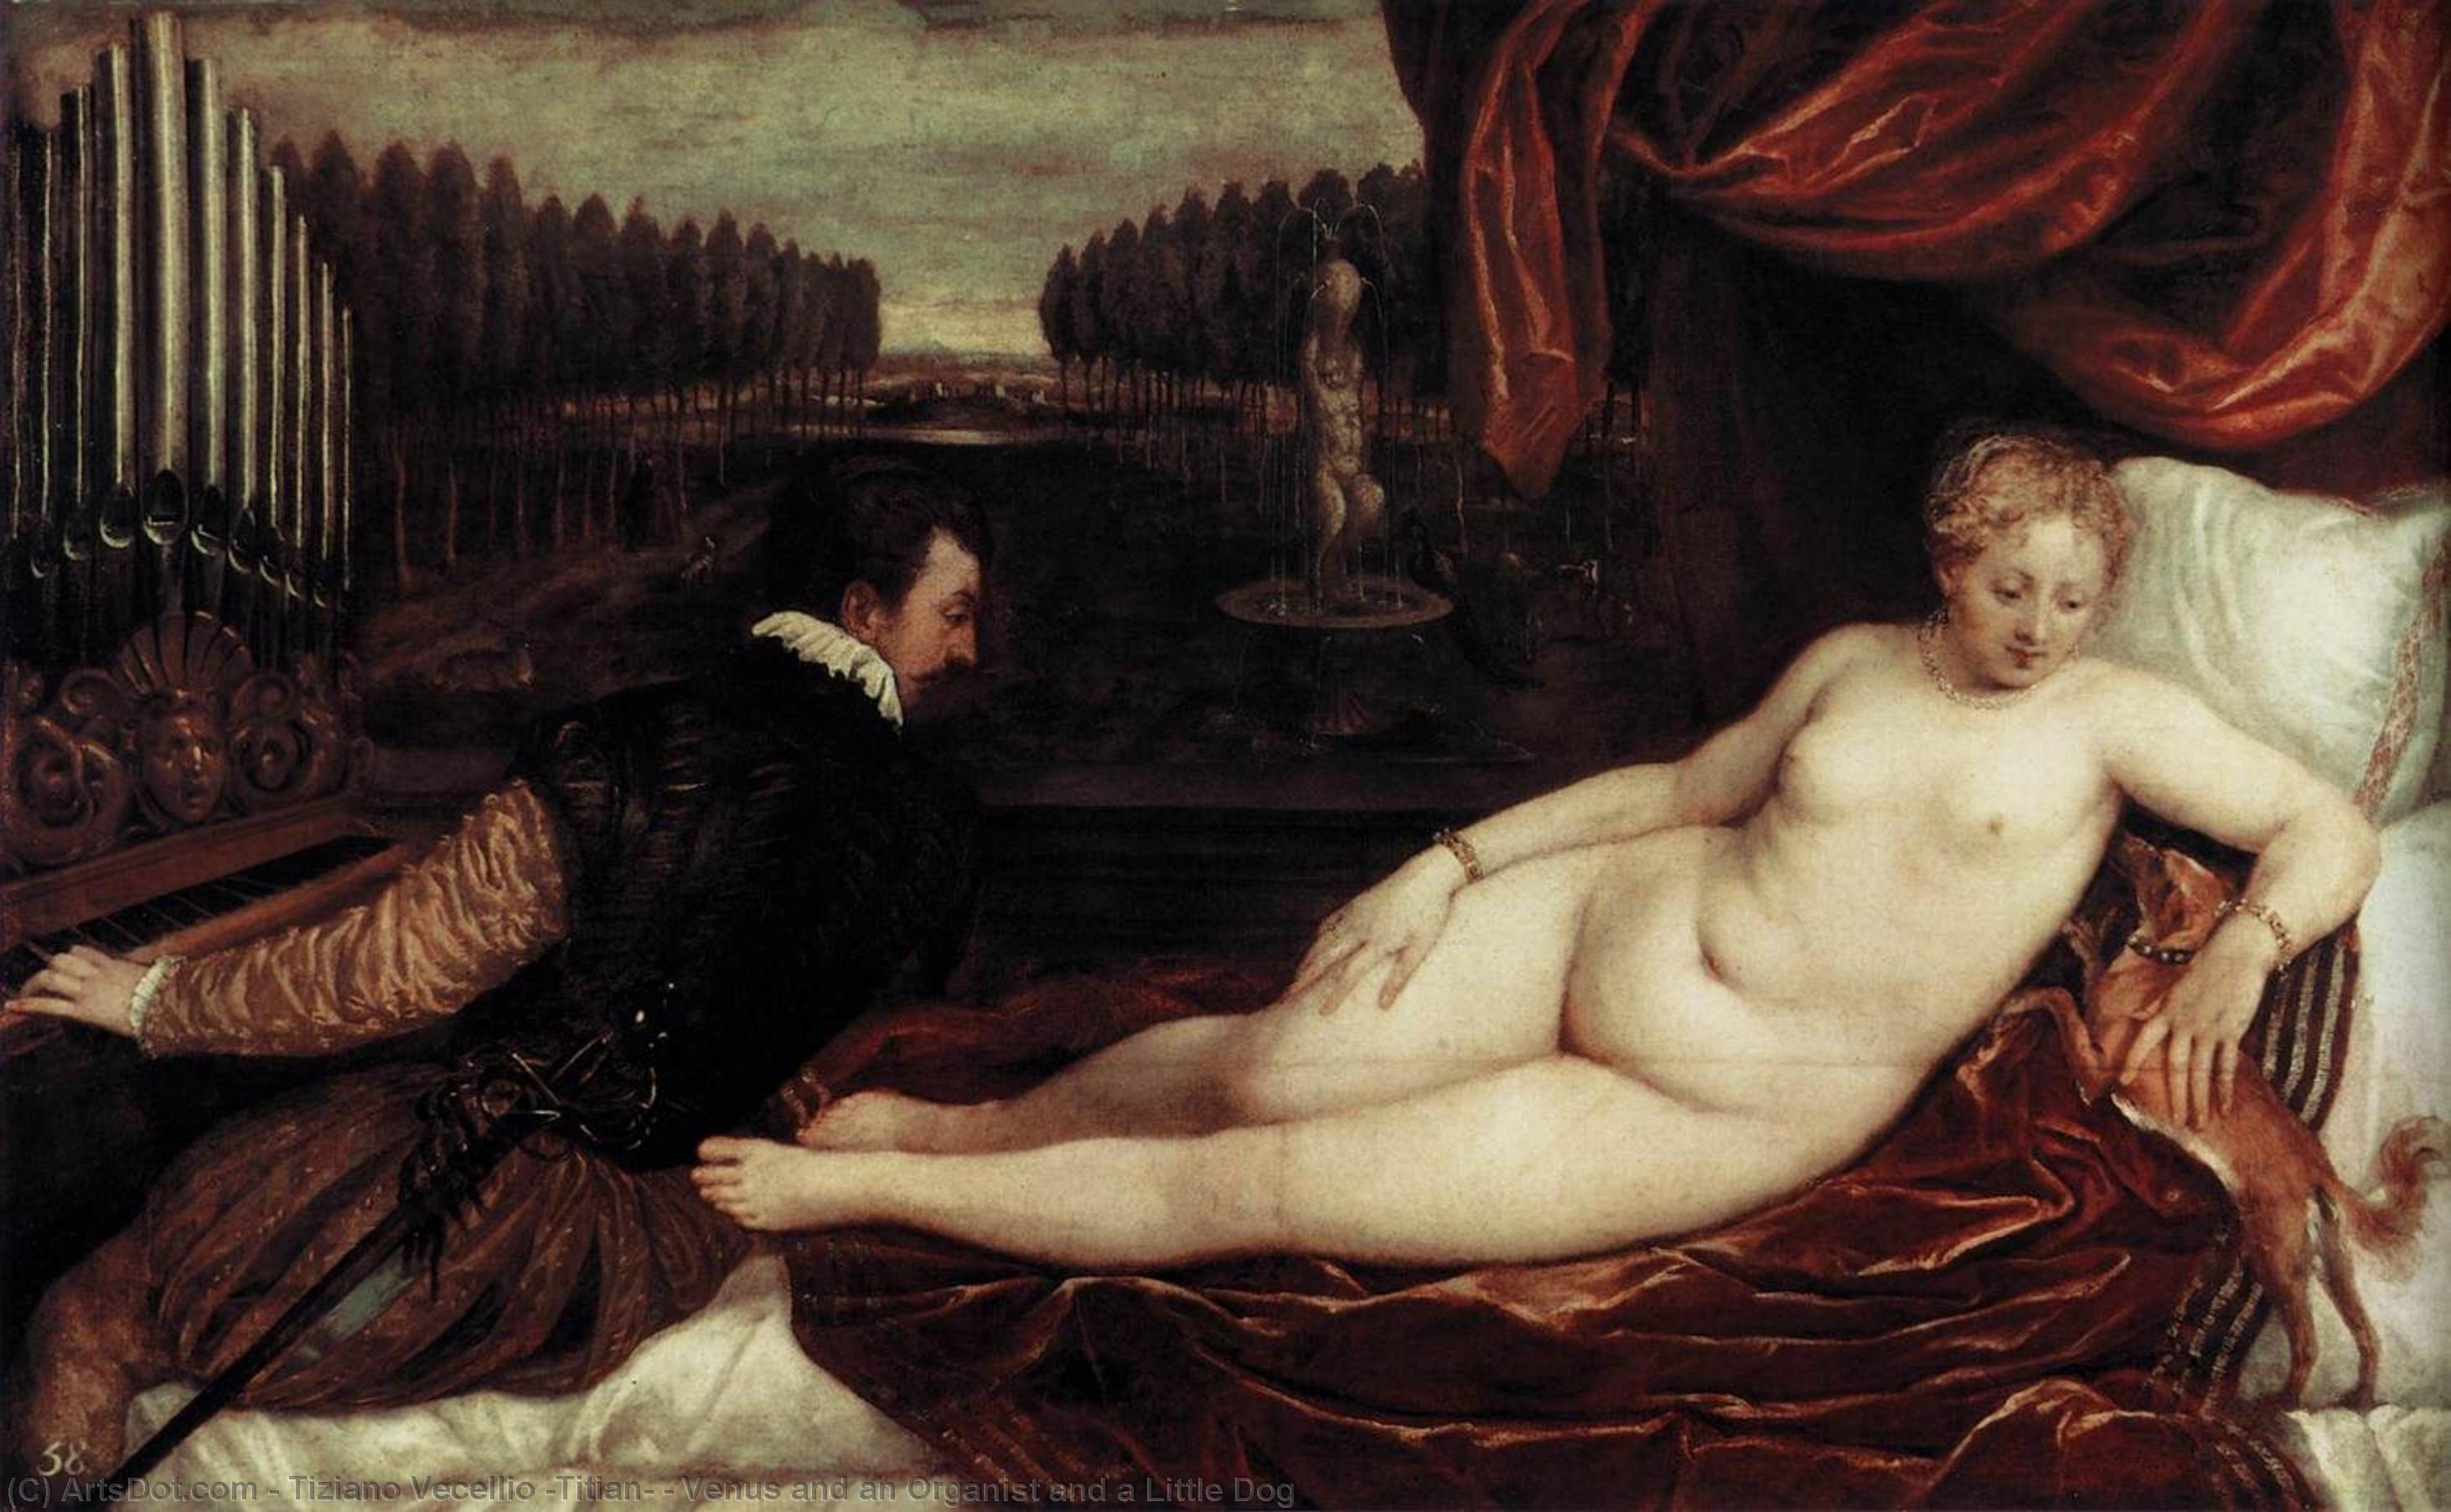 WikiOO.org - Encyclopedia of Fine Arts - Lukisan, Artwork Tiziano Vecellio (Titian) - Venus and an Organist and a Little Dog